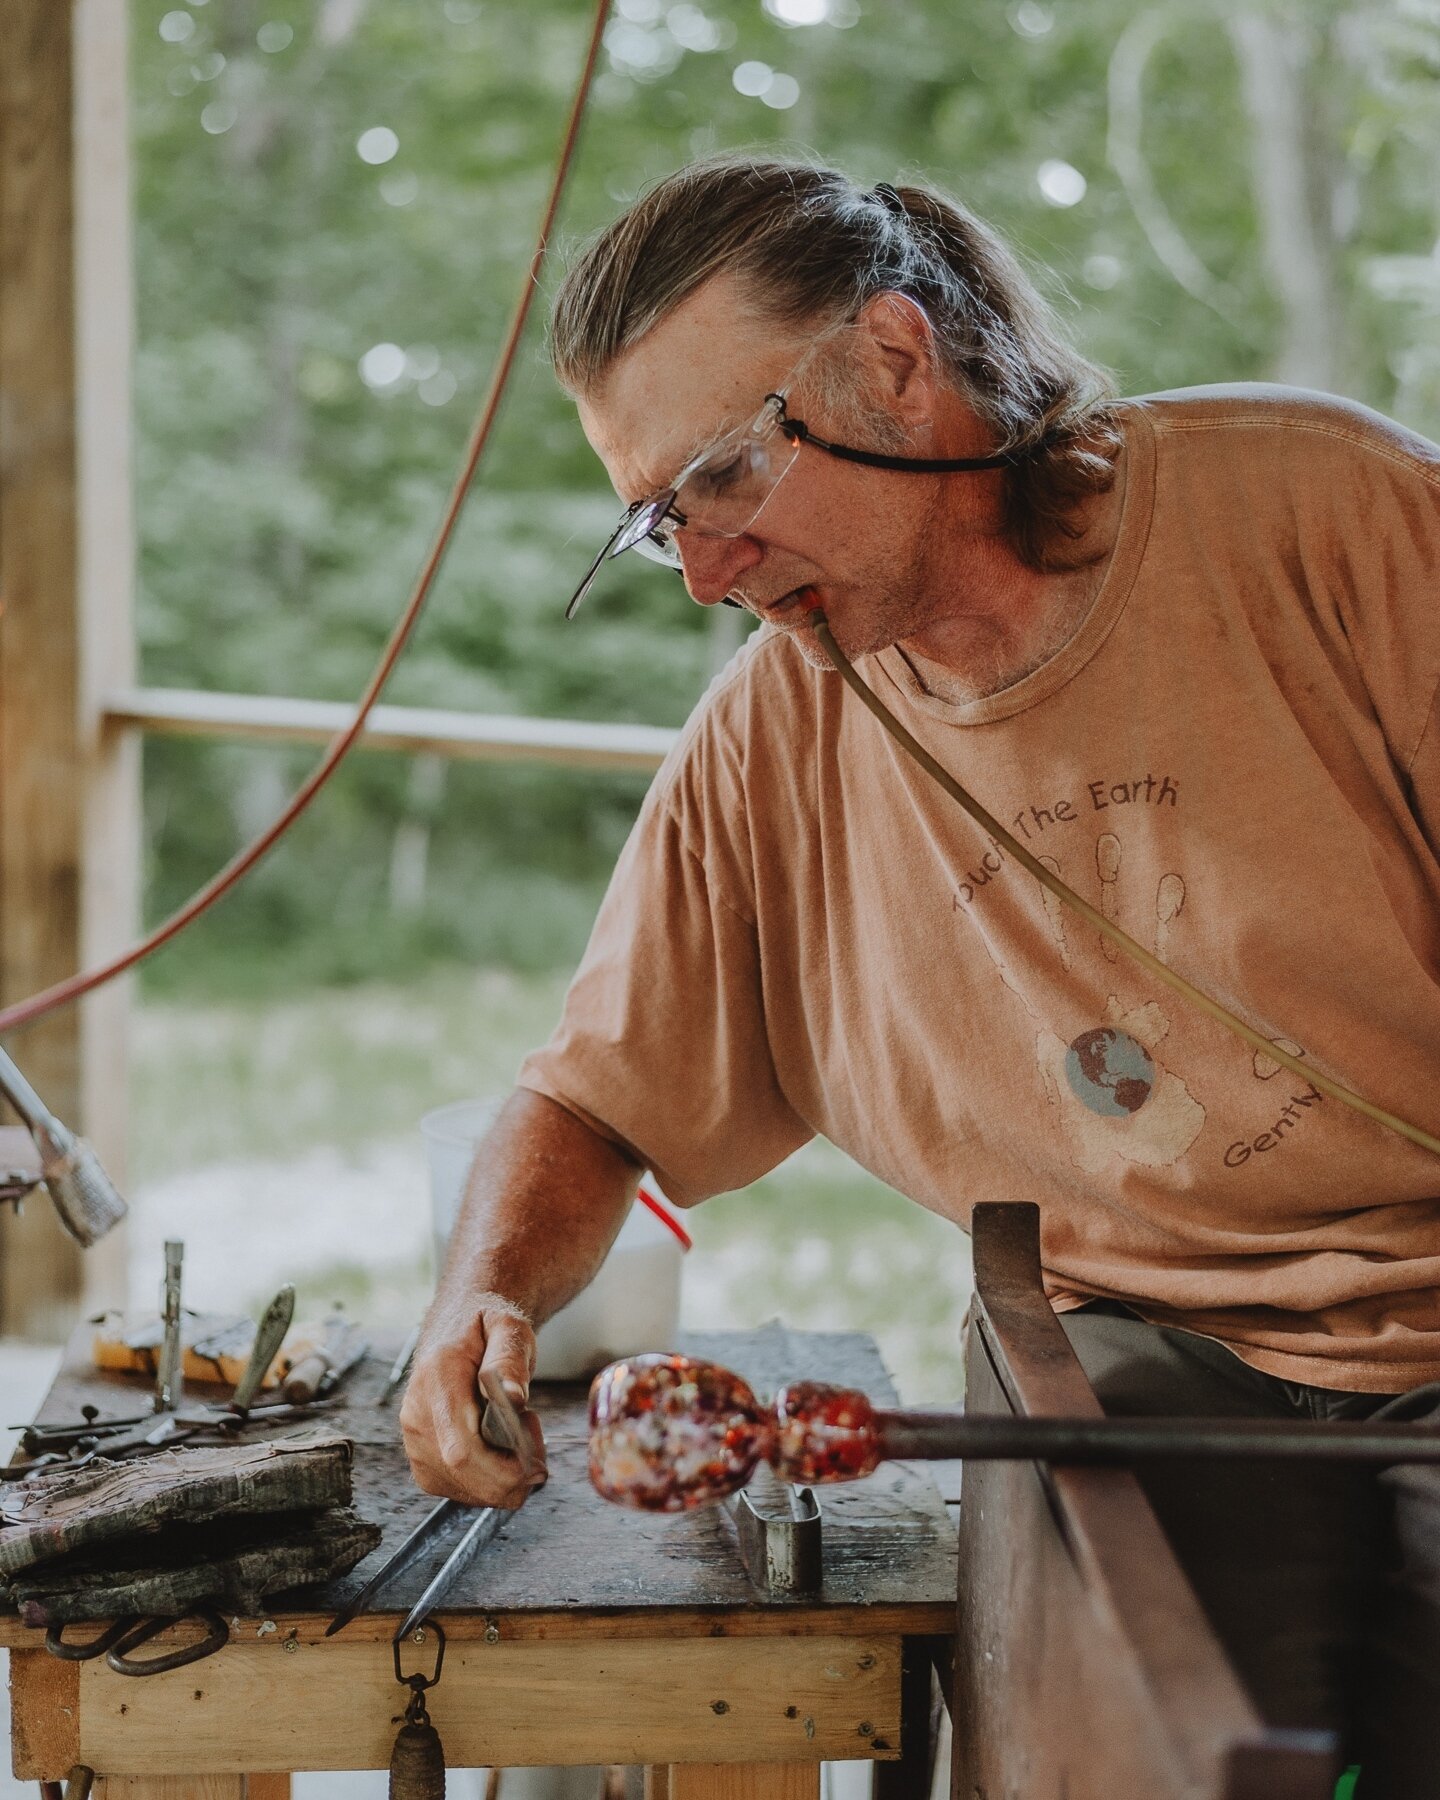 artisans and creators: Tim the Glass Blower⁠
⁠
⁠
Tim Blair works with The Villages Folk School that is based in Keosauqua, IA. For more information on the classes that they offer, visit their website www.villagesfolkschool.com⁠
⁠
#villagesofvanburen 